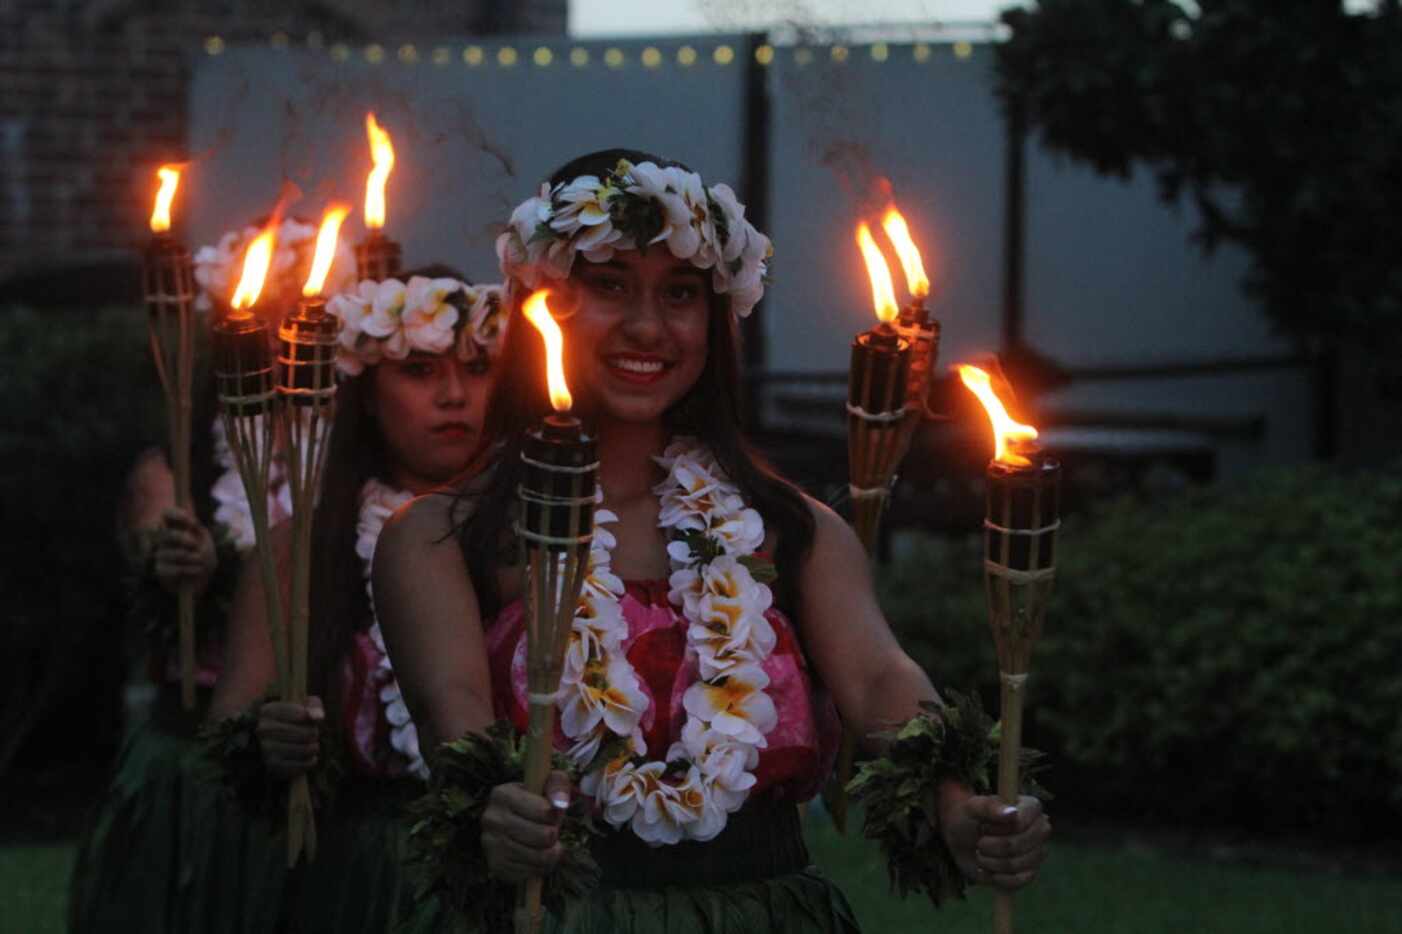 Hawaiian Night at NYLO Dallas/Los Colinas  included tiki drinks, a poolside dinner and...